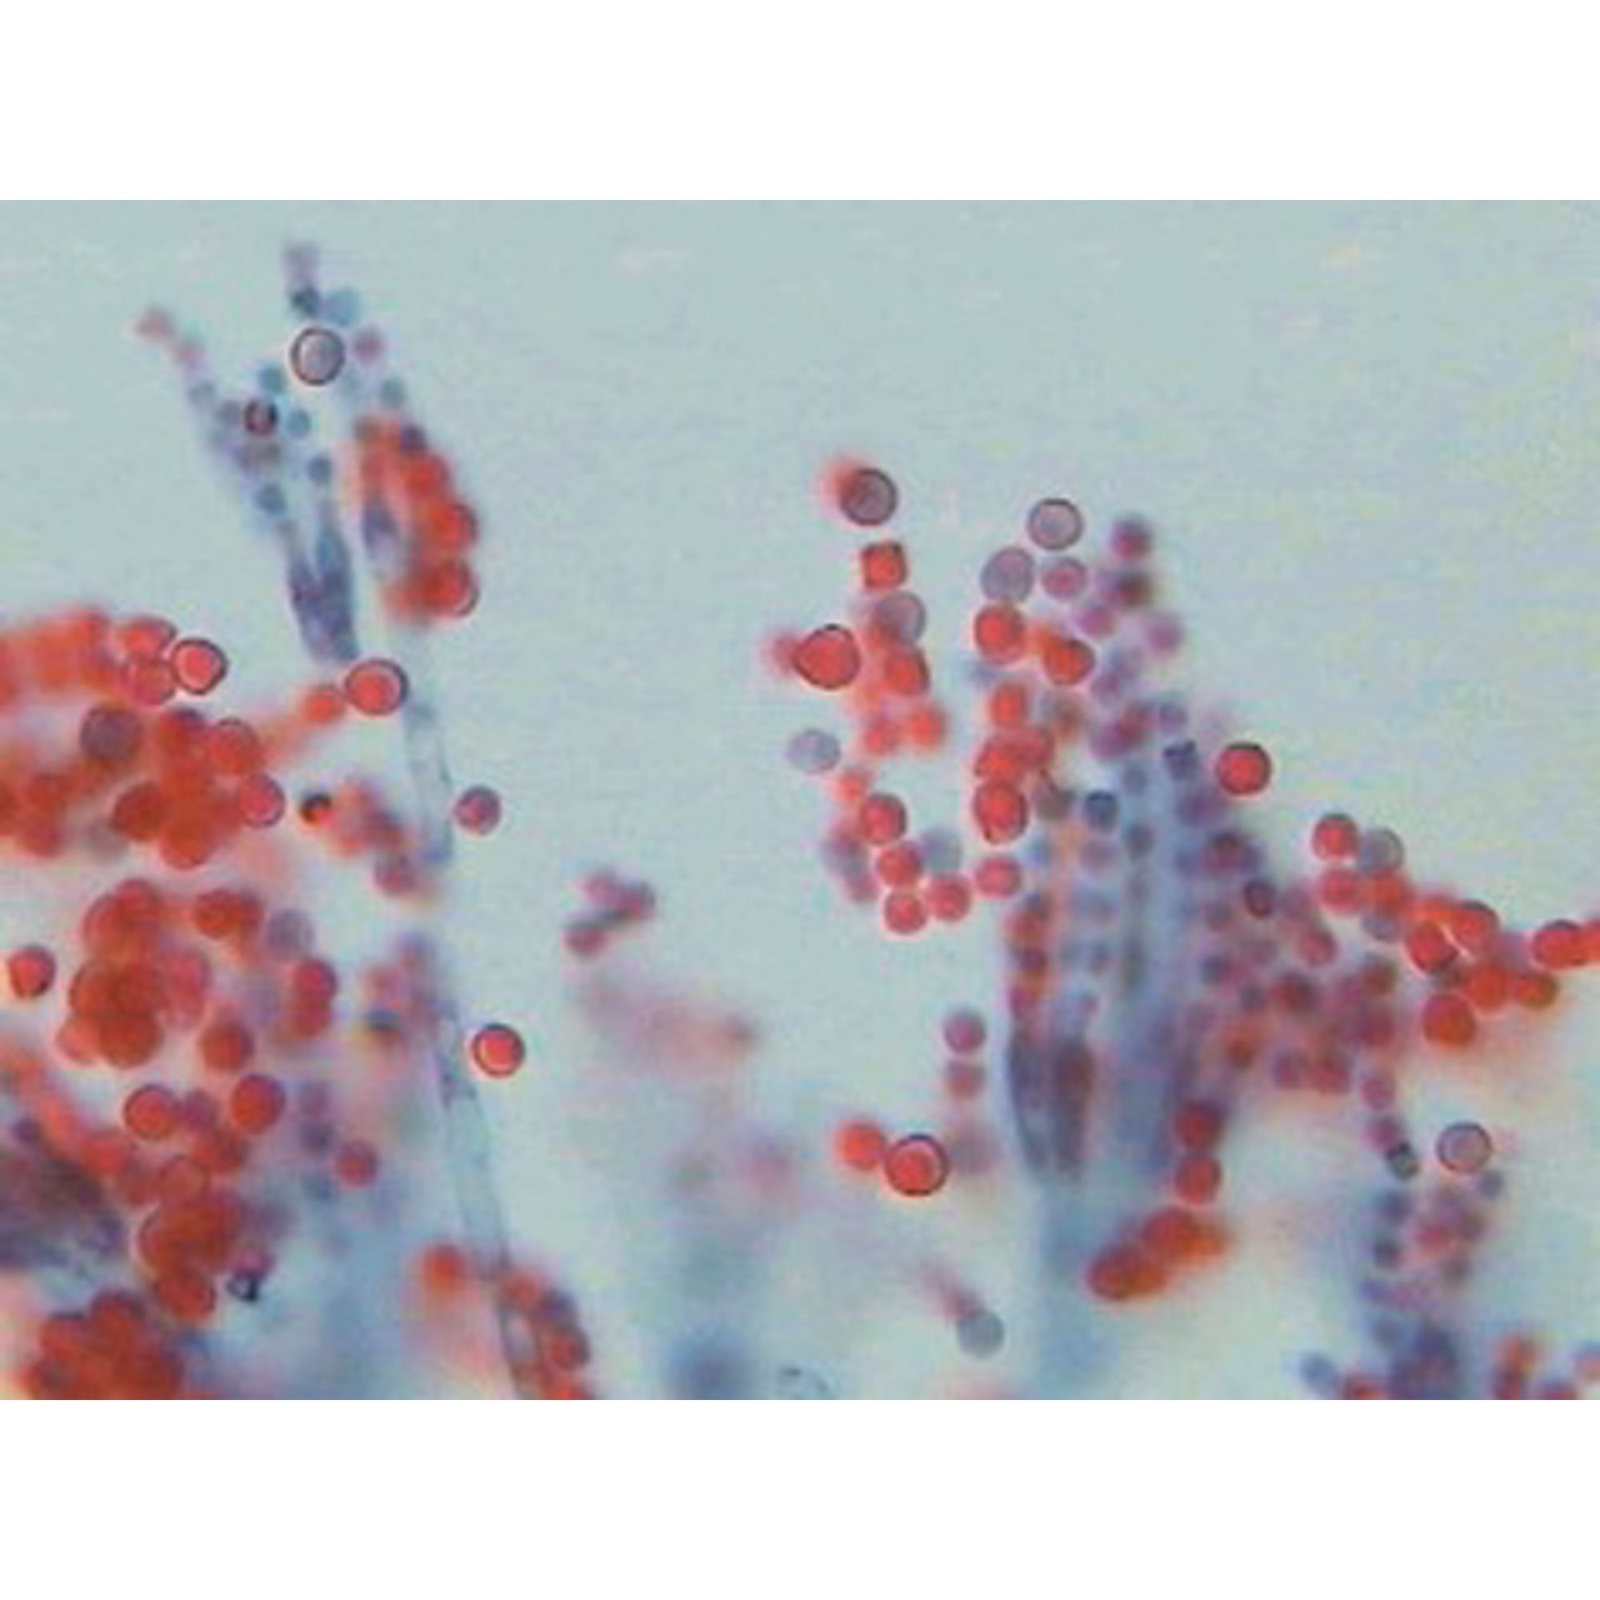 Penicillium Section With Hyphae And